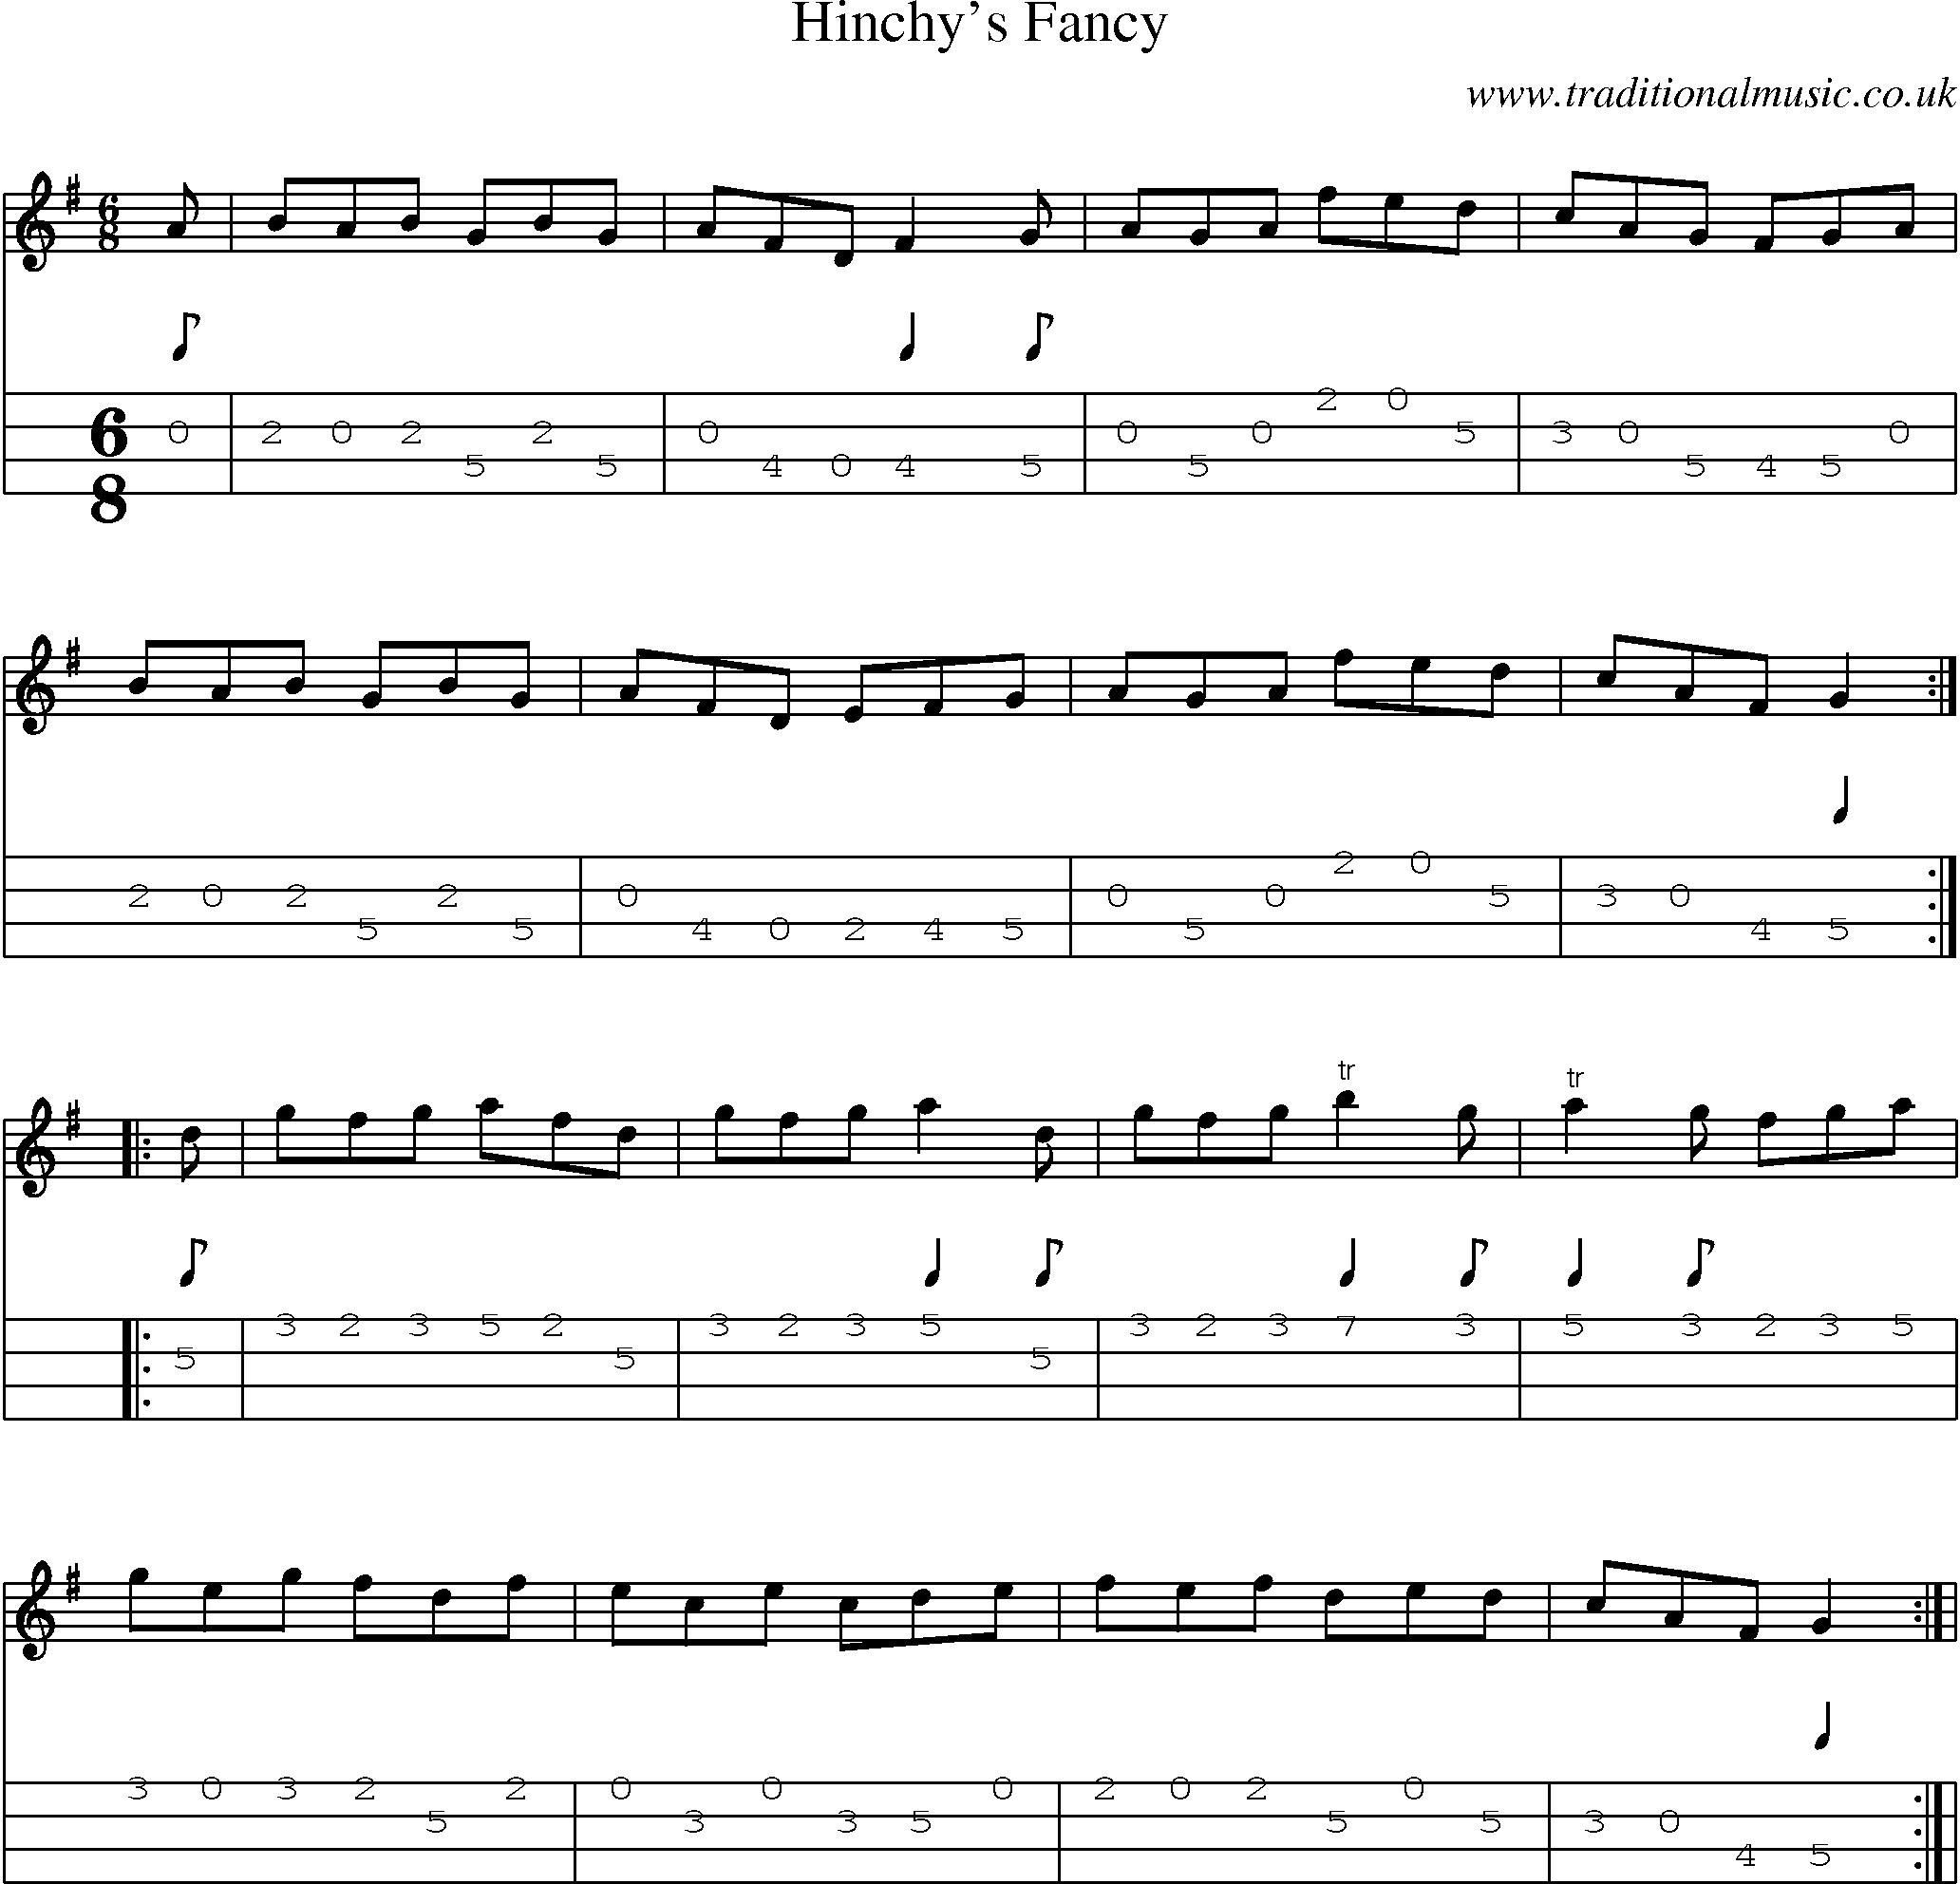 Music Score and Mandolin Tabs for Hinchys Fancy